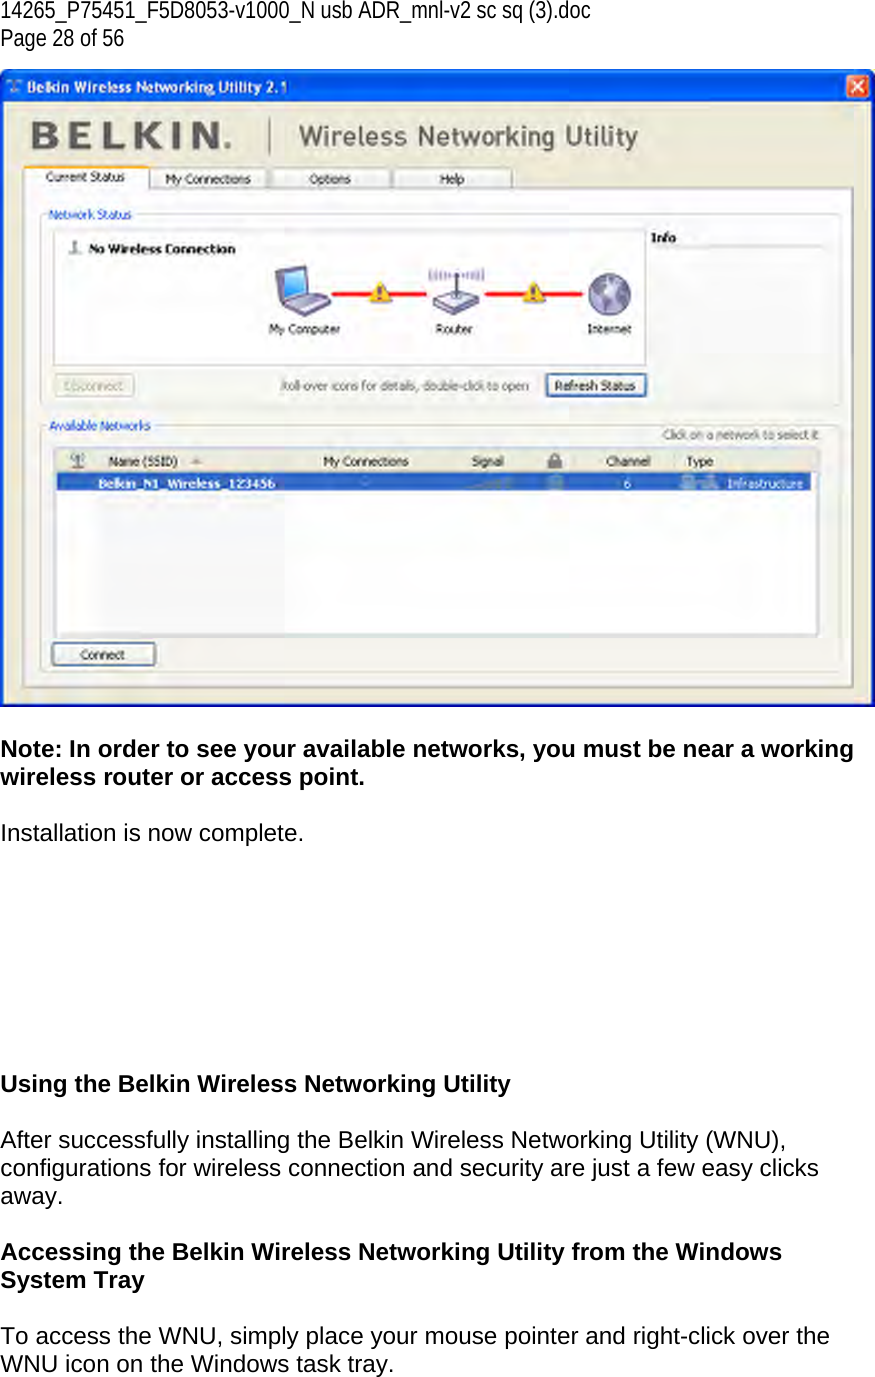 14265_P75451_F5D8053-v1000_N usb ADR_mnl-v2 sc sq (3).doc Page 28 of 56   Note: In order to see your available networks, you must be near a working wireless router or access point.  Installation is now complete.         Using the Belkin Wireless Networking Utility   After successfully installing the Belkin Wireless Networking Utility (WNU), configurations for wireless connection and security are just a few easy clicks away.  Accessing the Belkin Wireless Networking Utility from the Windows System Tray  To access the WNU, simply place your mouse pointer and right-click over the WNU icon on the Windows task tray.  